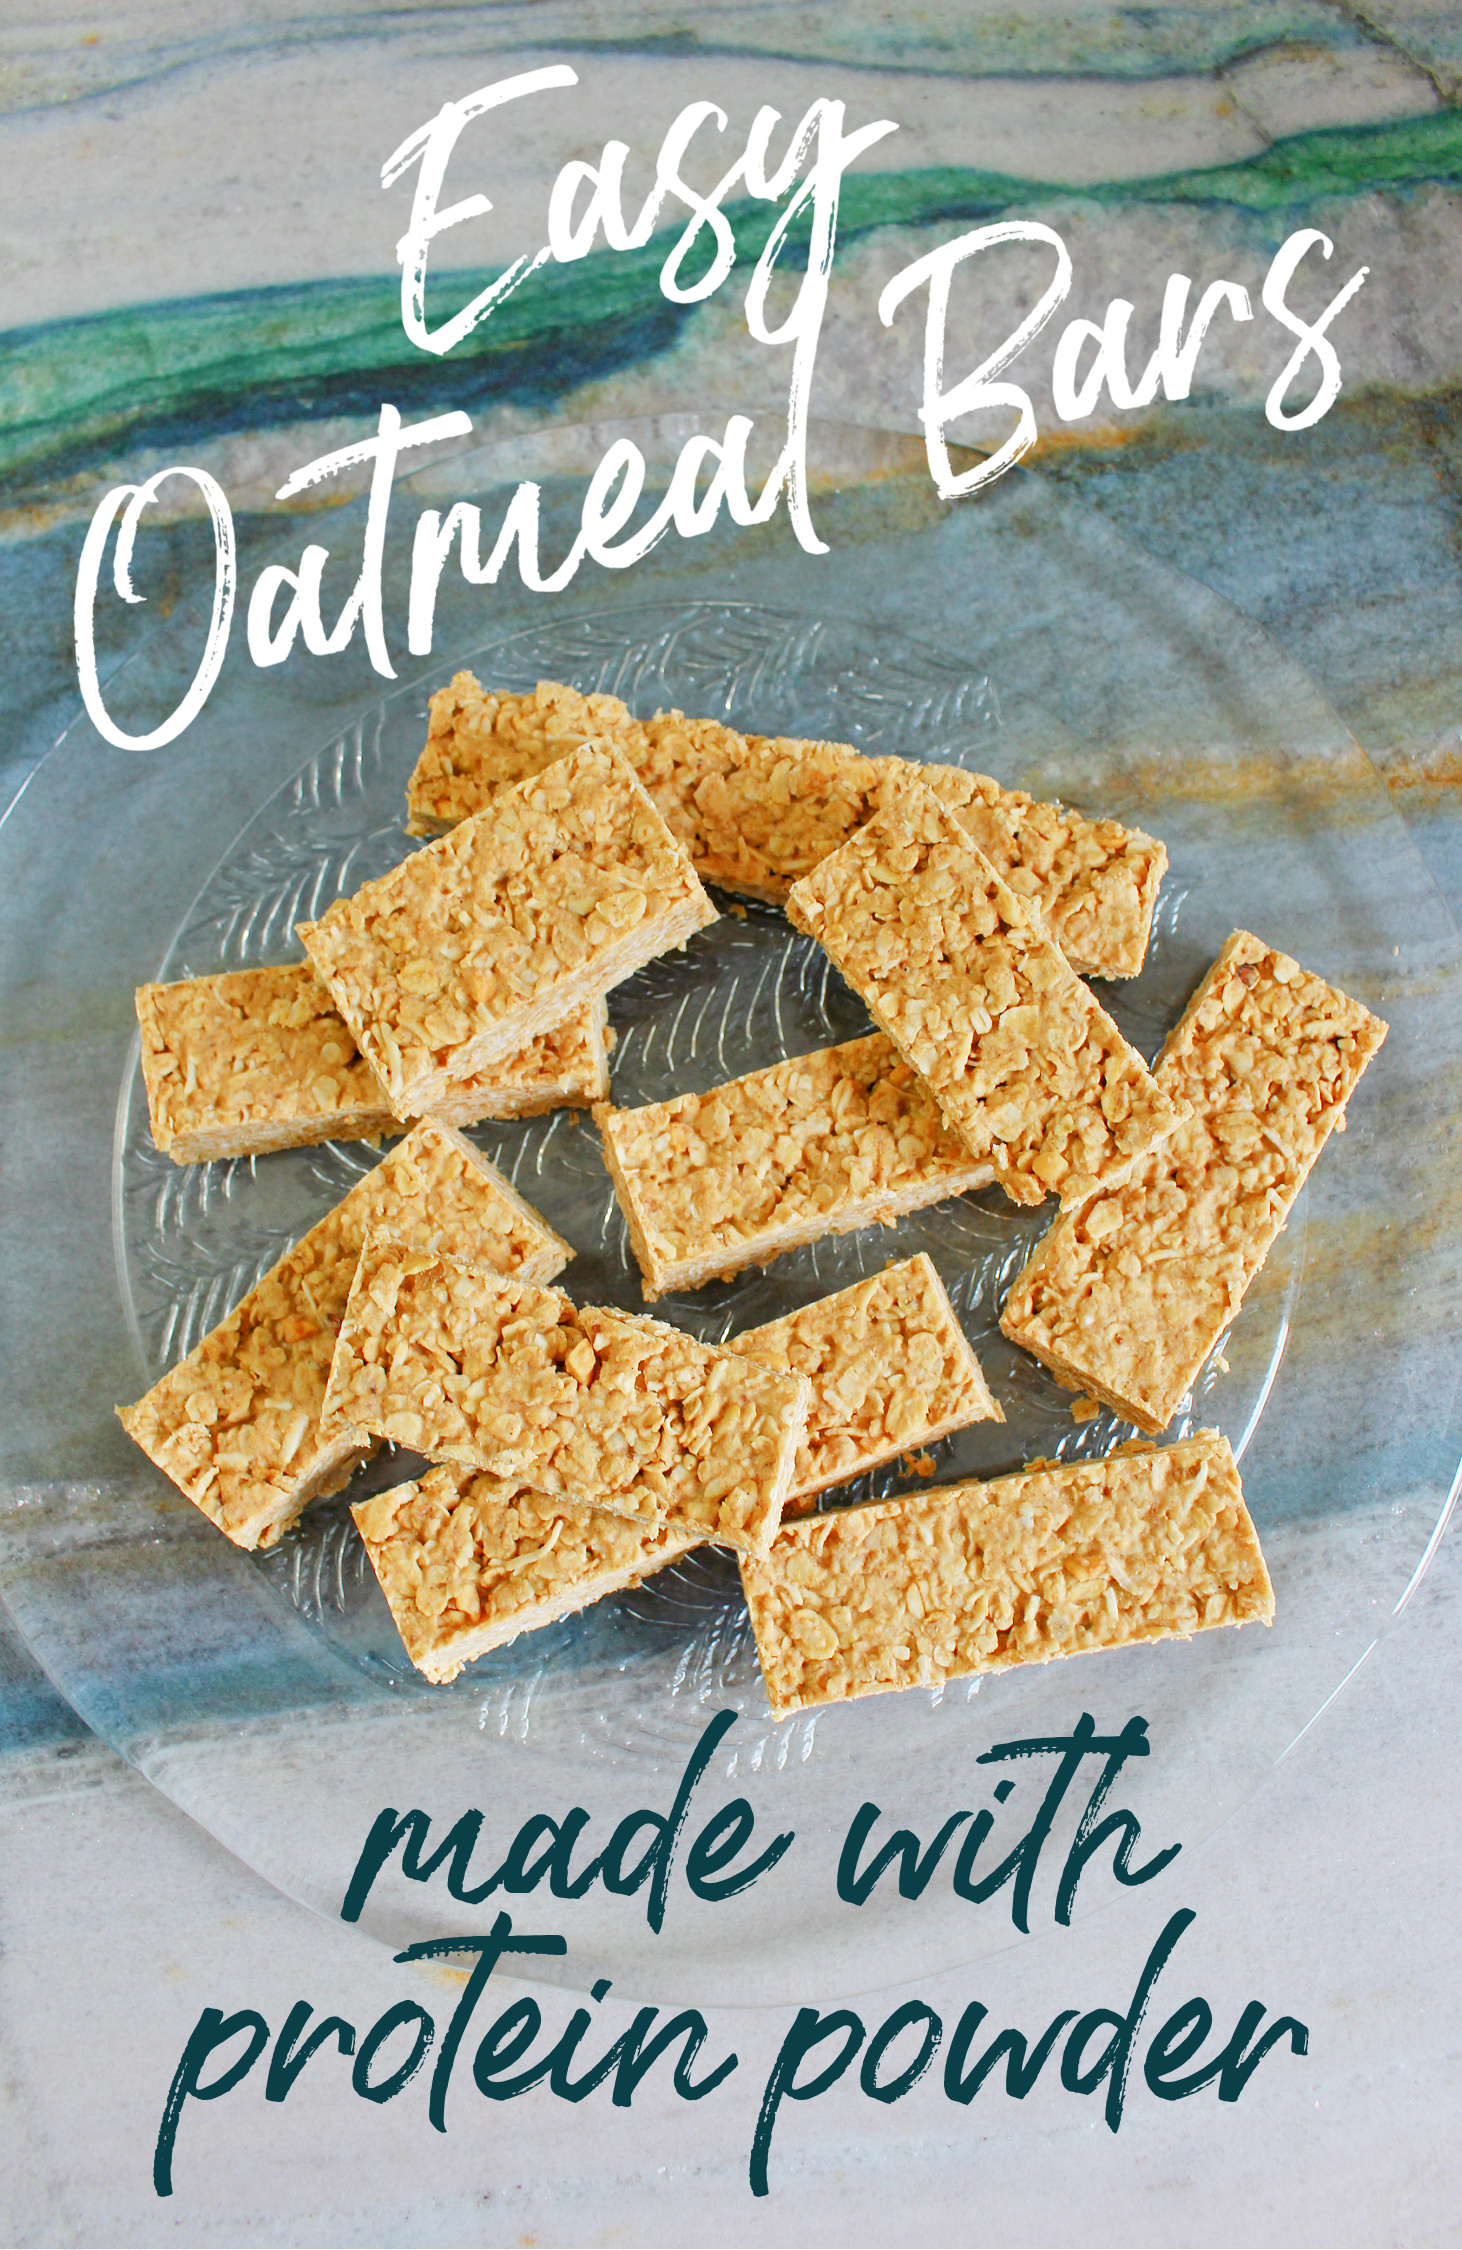 Easy Peanut Butter Oatmeal Bars with Protein Powder